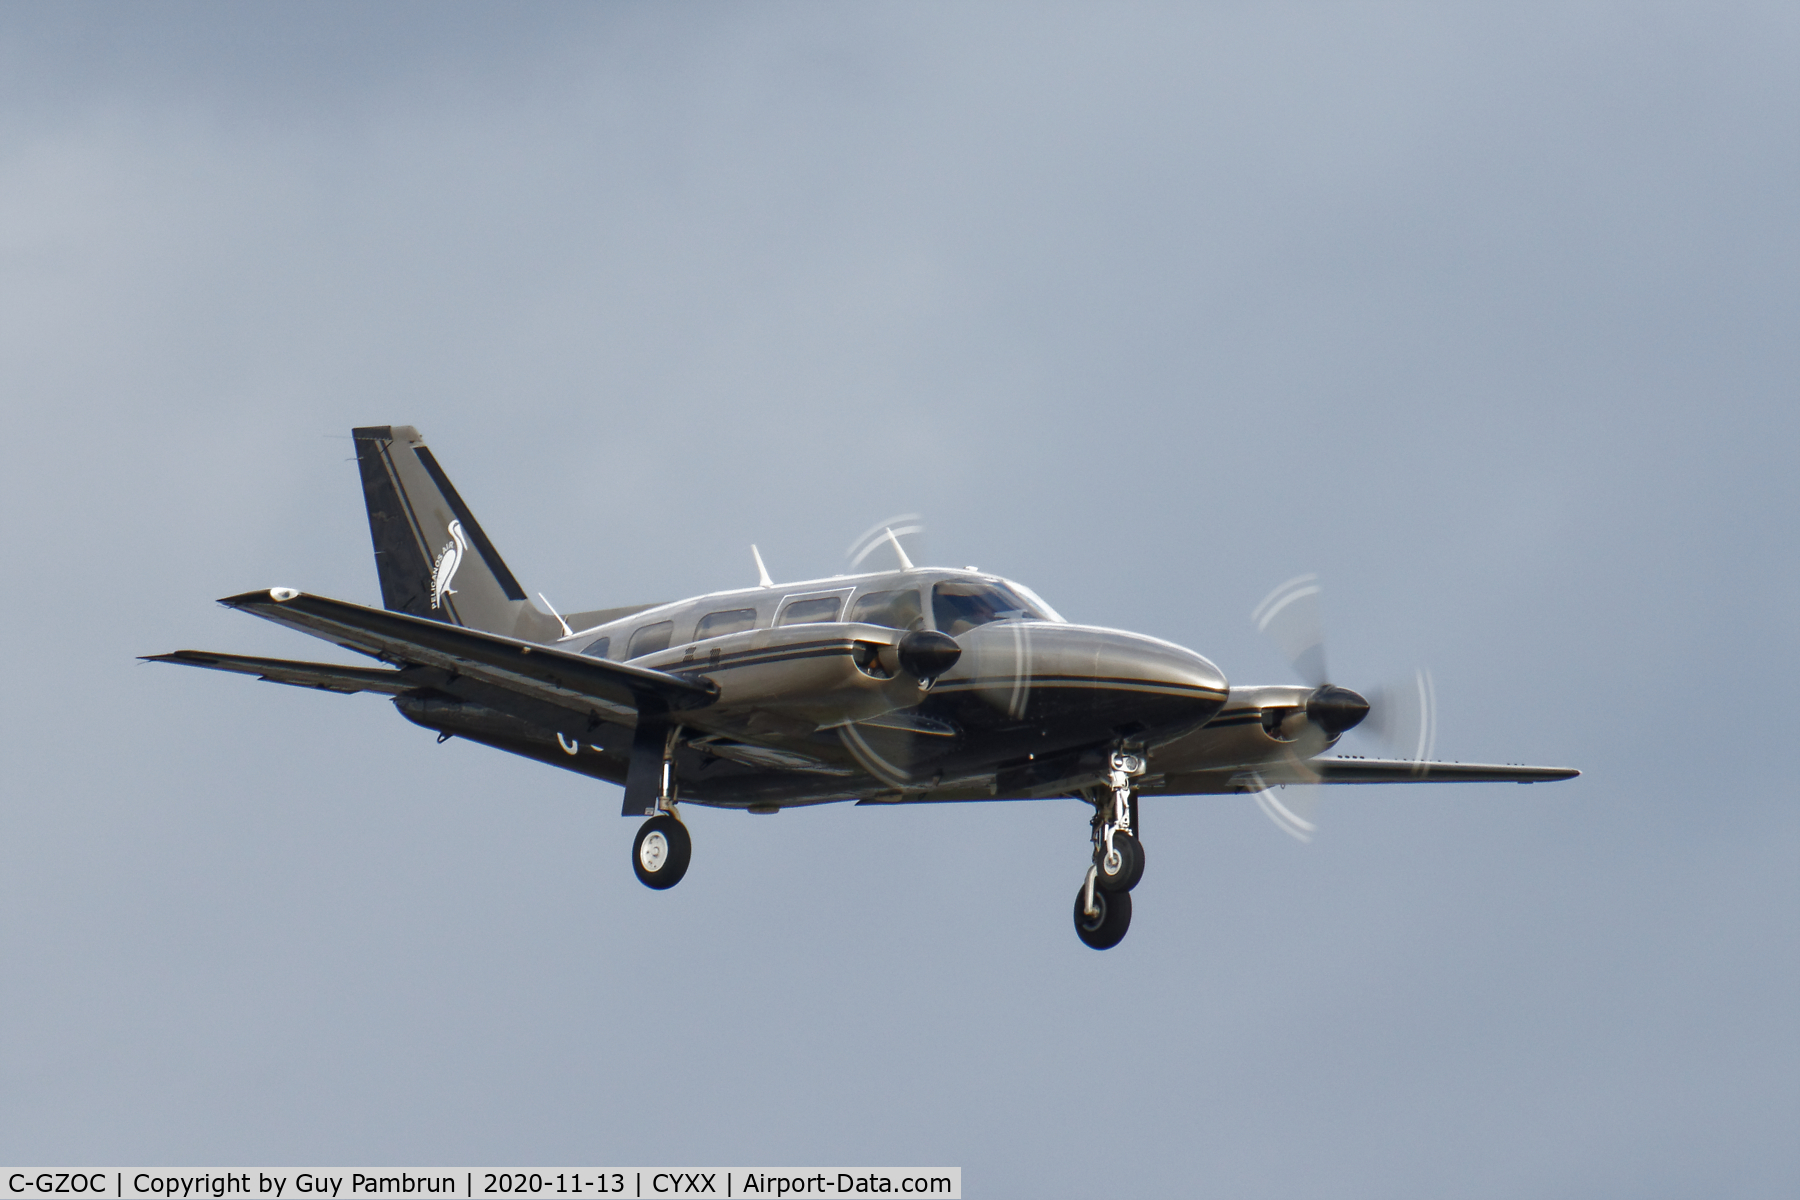 C-GZOC, 1975 Piper PA-31-325 Navajo C/R C/N 31-7512018, On final for 19